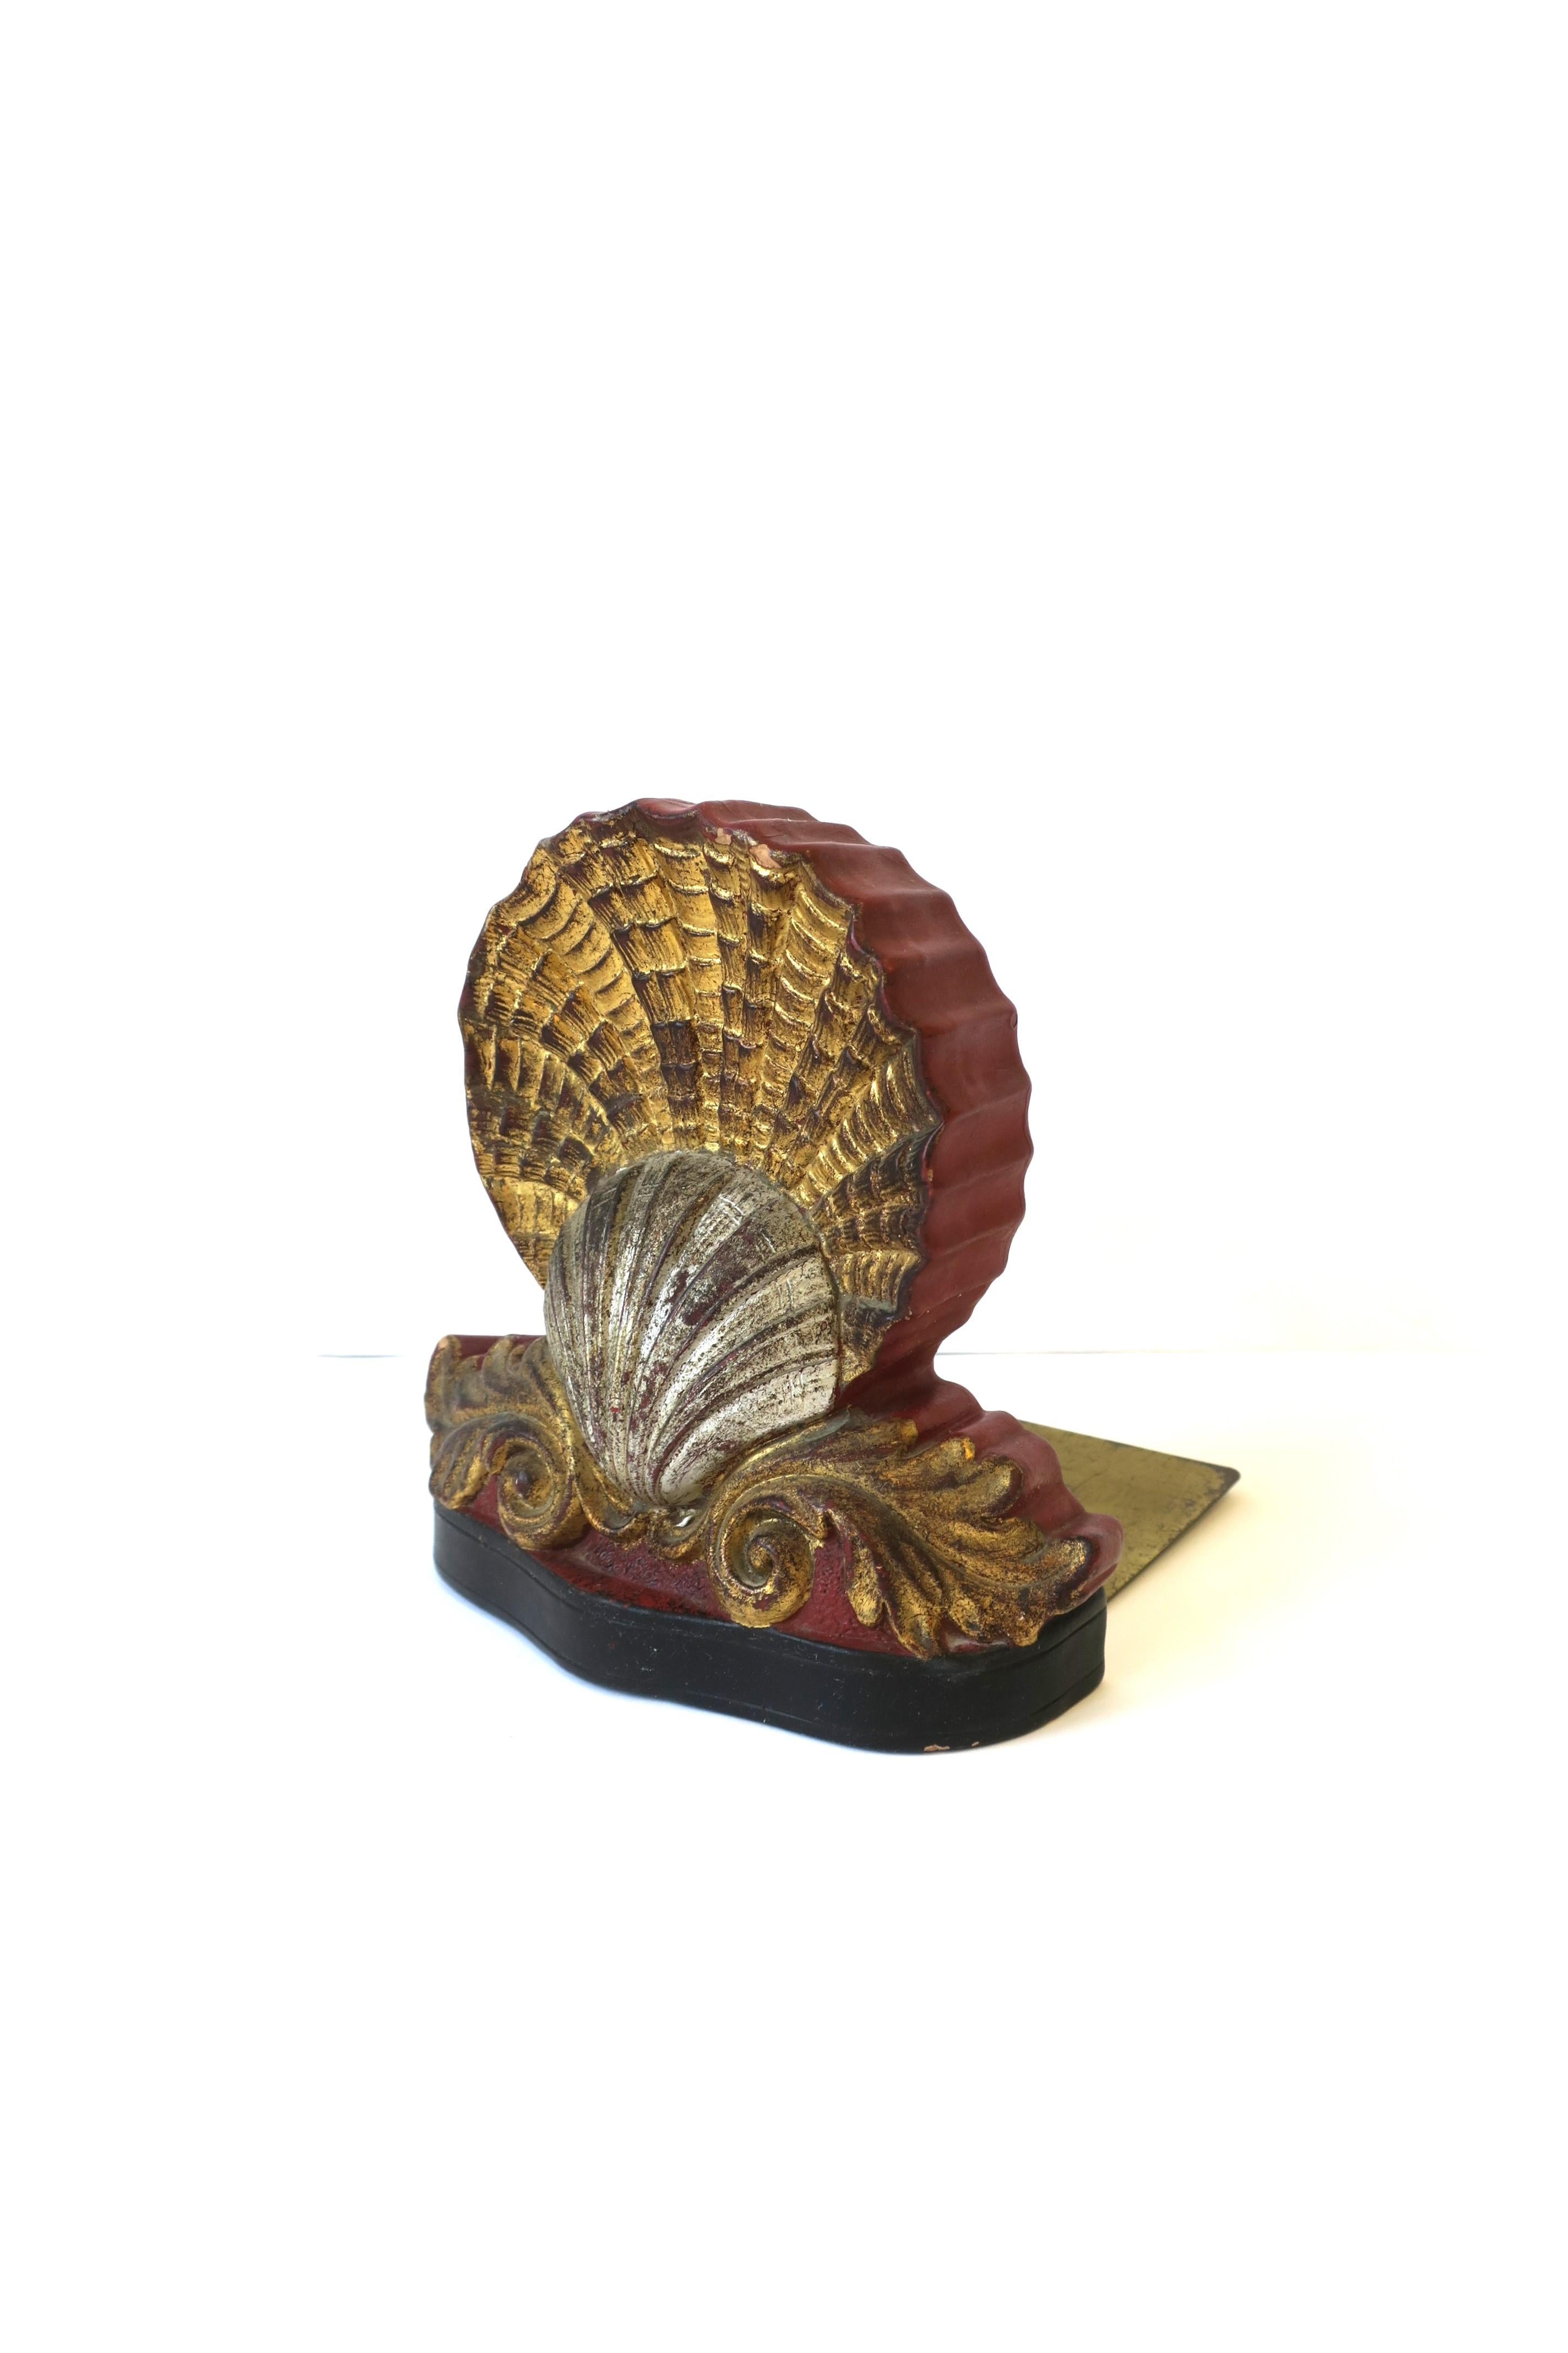 An Italian ceramic gold and silver scallop seashell bookend, circa early to mid-20th century, Italy. Bookend has both gold and silver gilt scallop seashells, two gold gilt acanthus leaves at base, red burgundy hue on side and back, black at base,